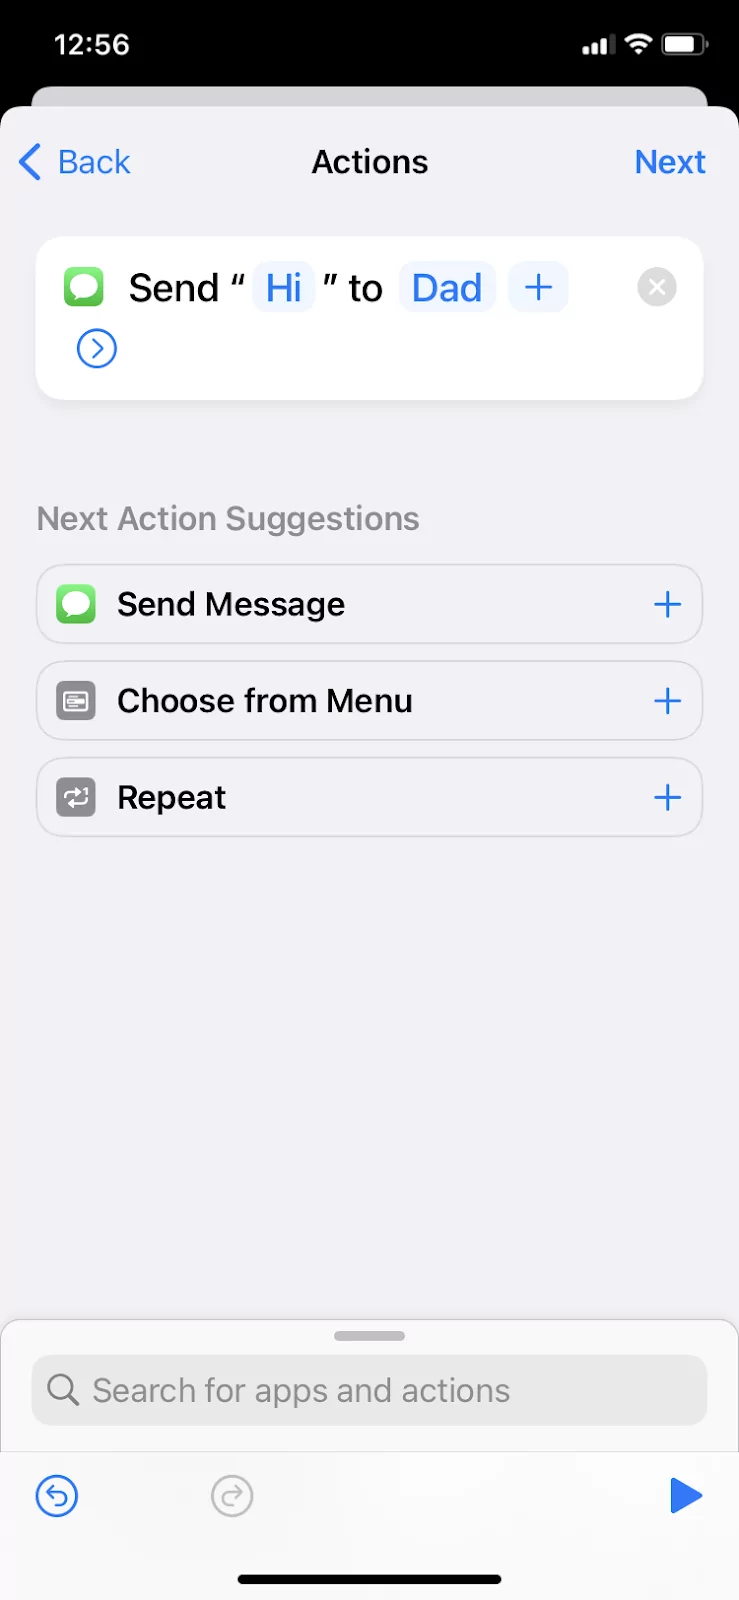 How to schedule a text: Creating a text message customized based on the recipient from an iPhone. 